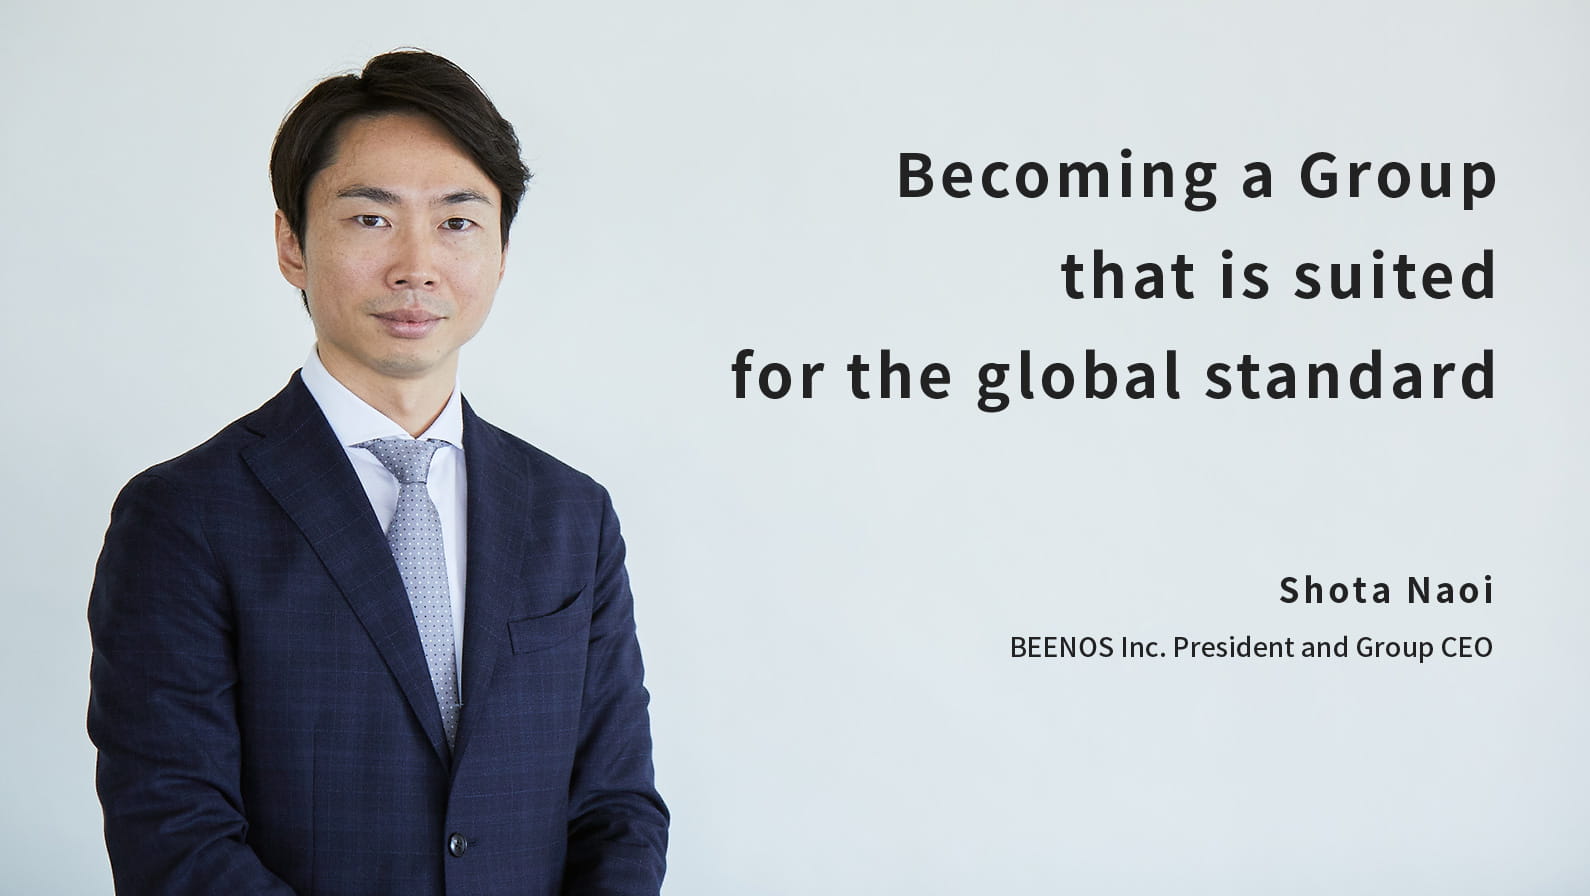 Becoming a Group that is suited for the global standard / Shota Naoi, BEENOS Inc. President and Group CEO